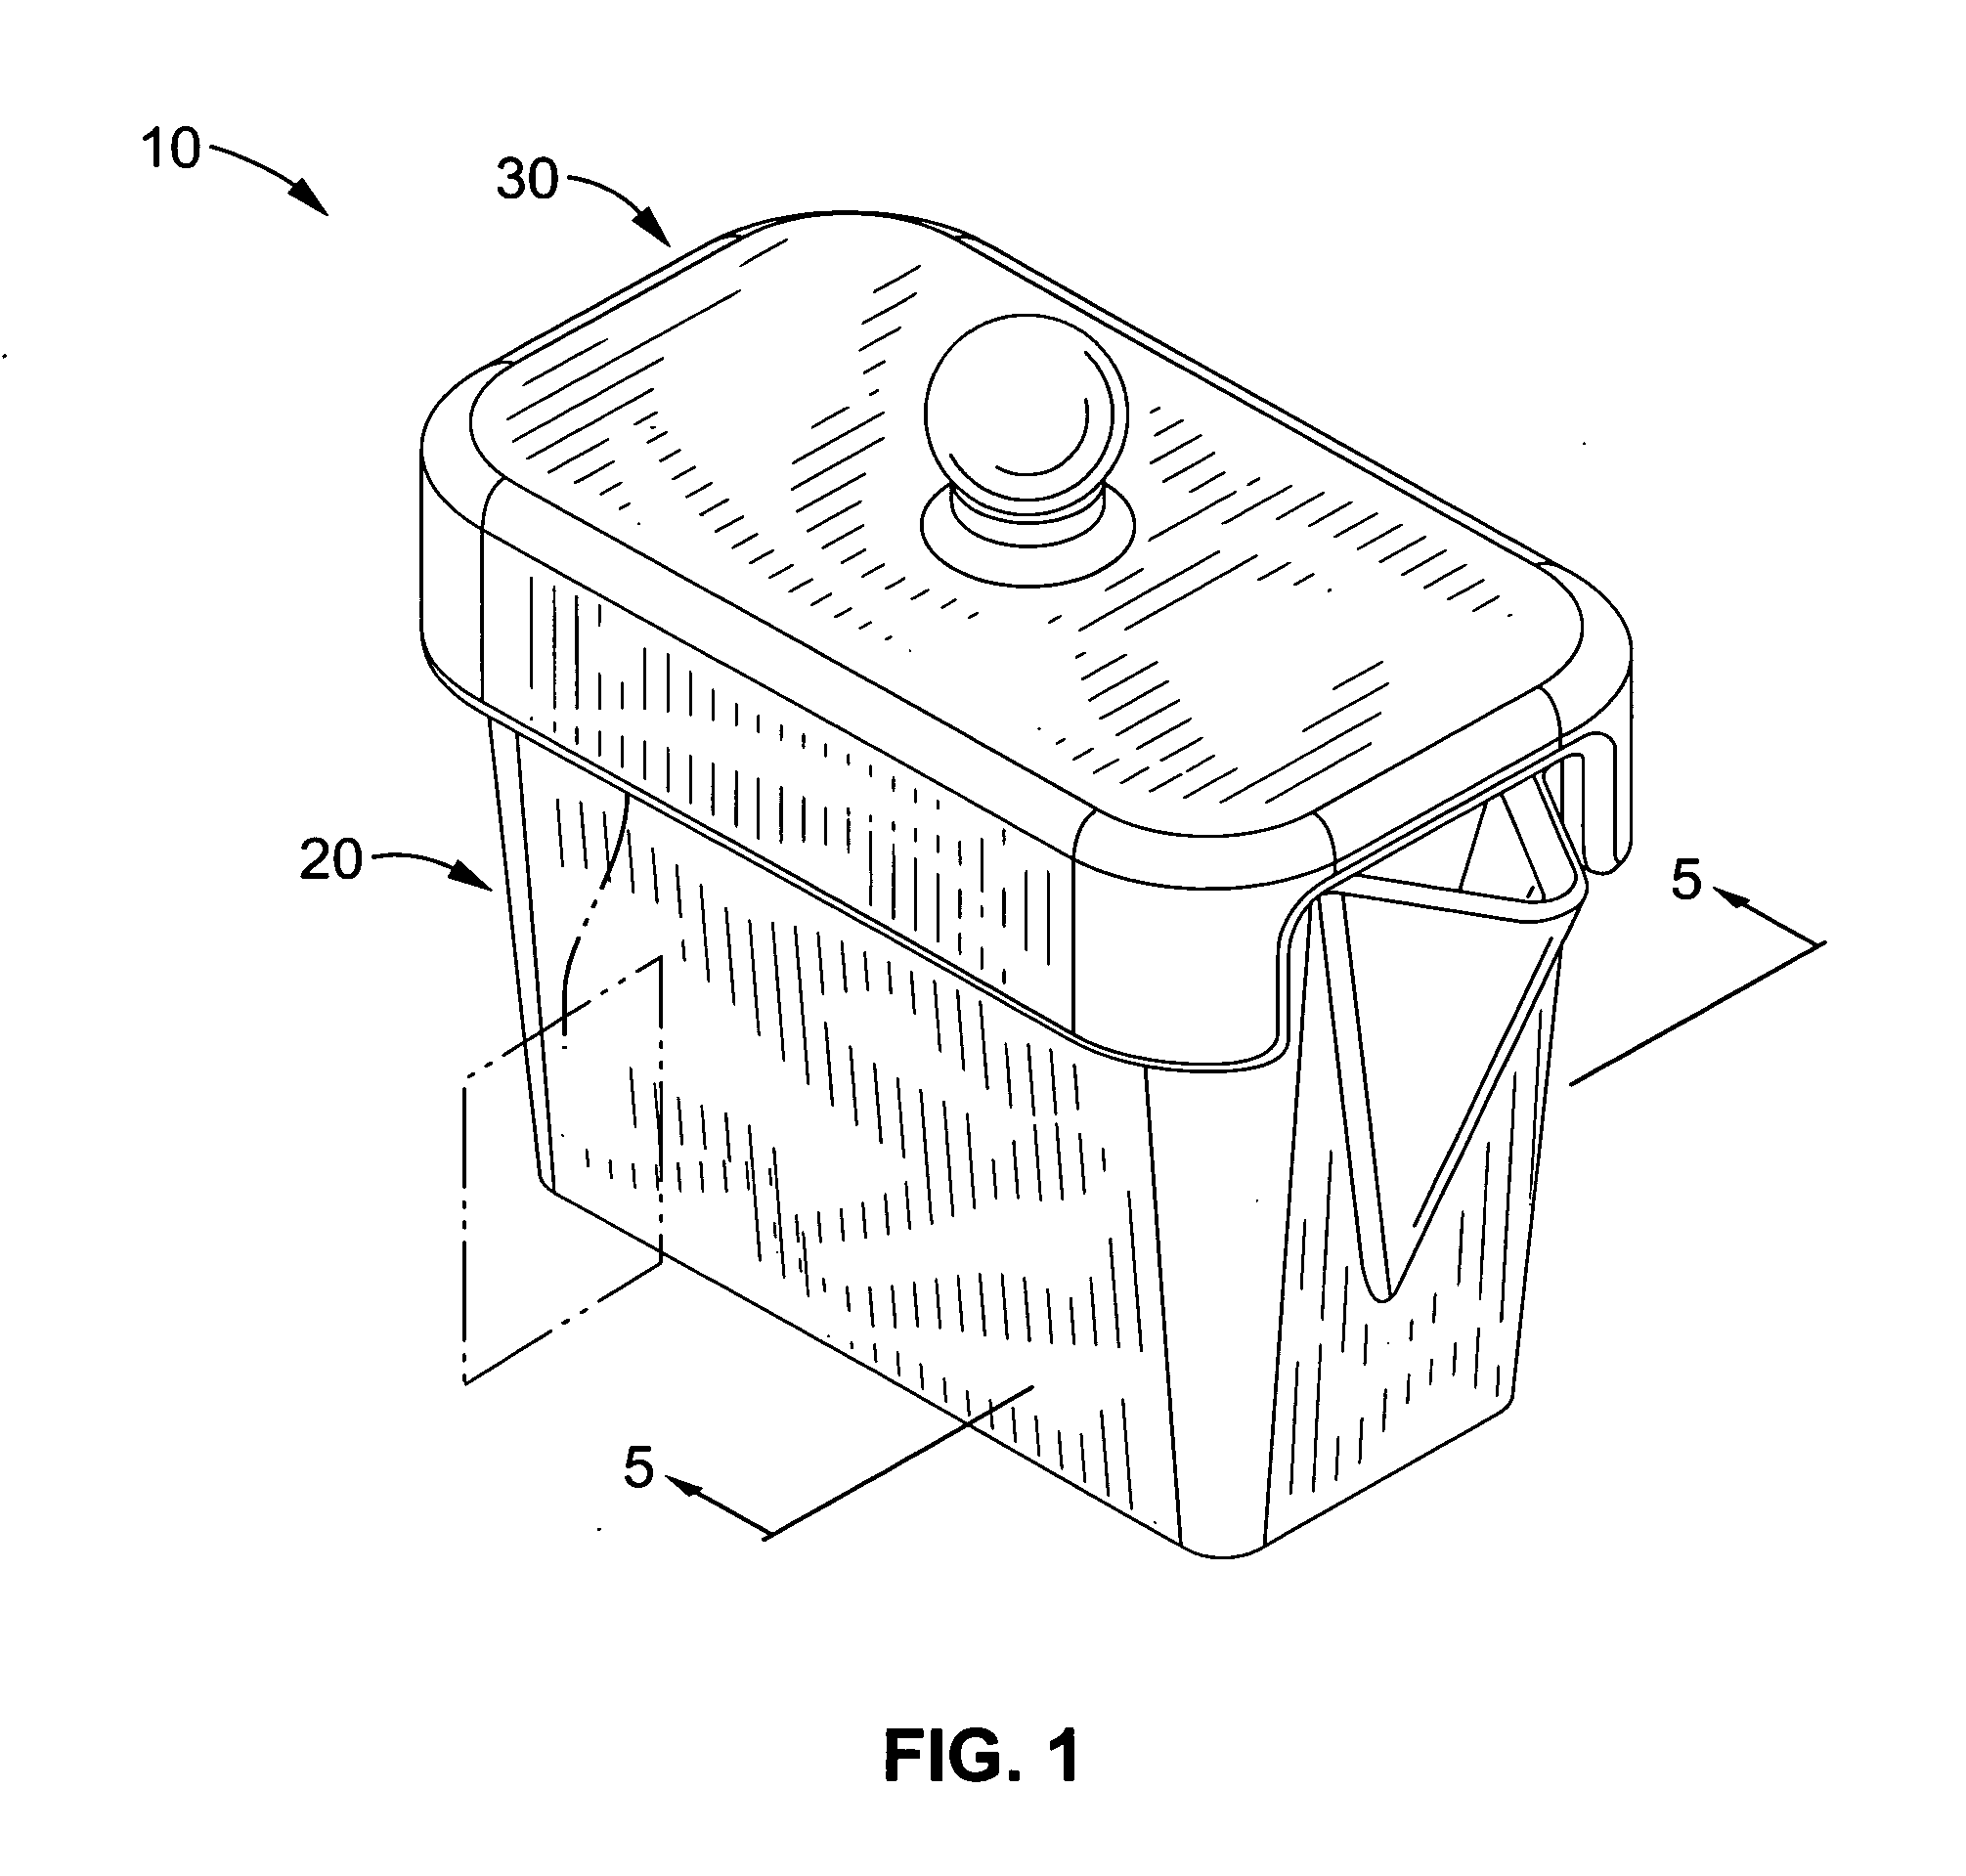 Method and apparatus for collecting liquid and extracting tea essence from a tea bag